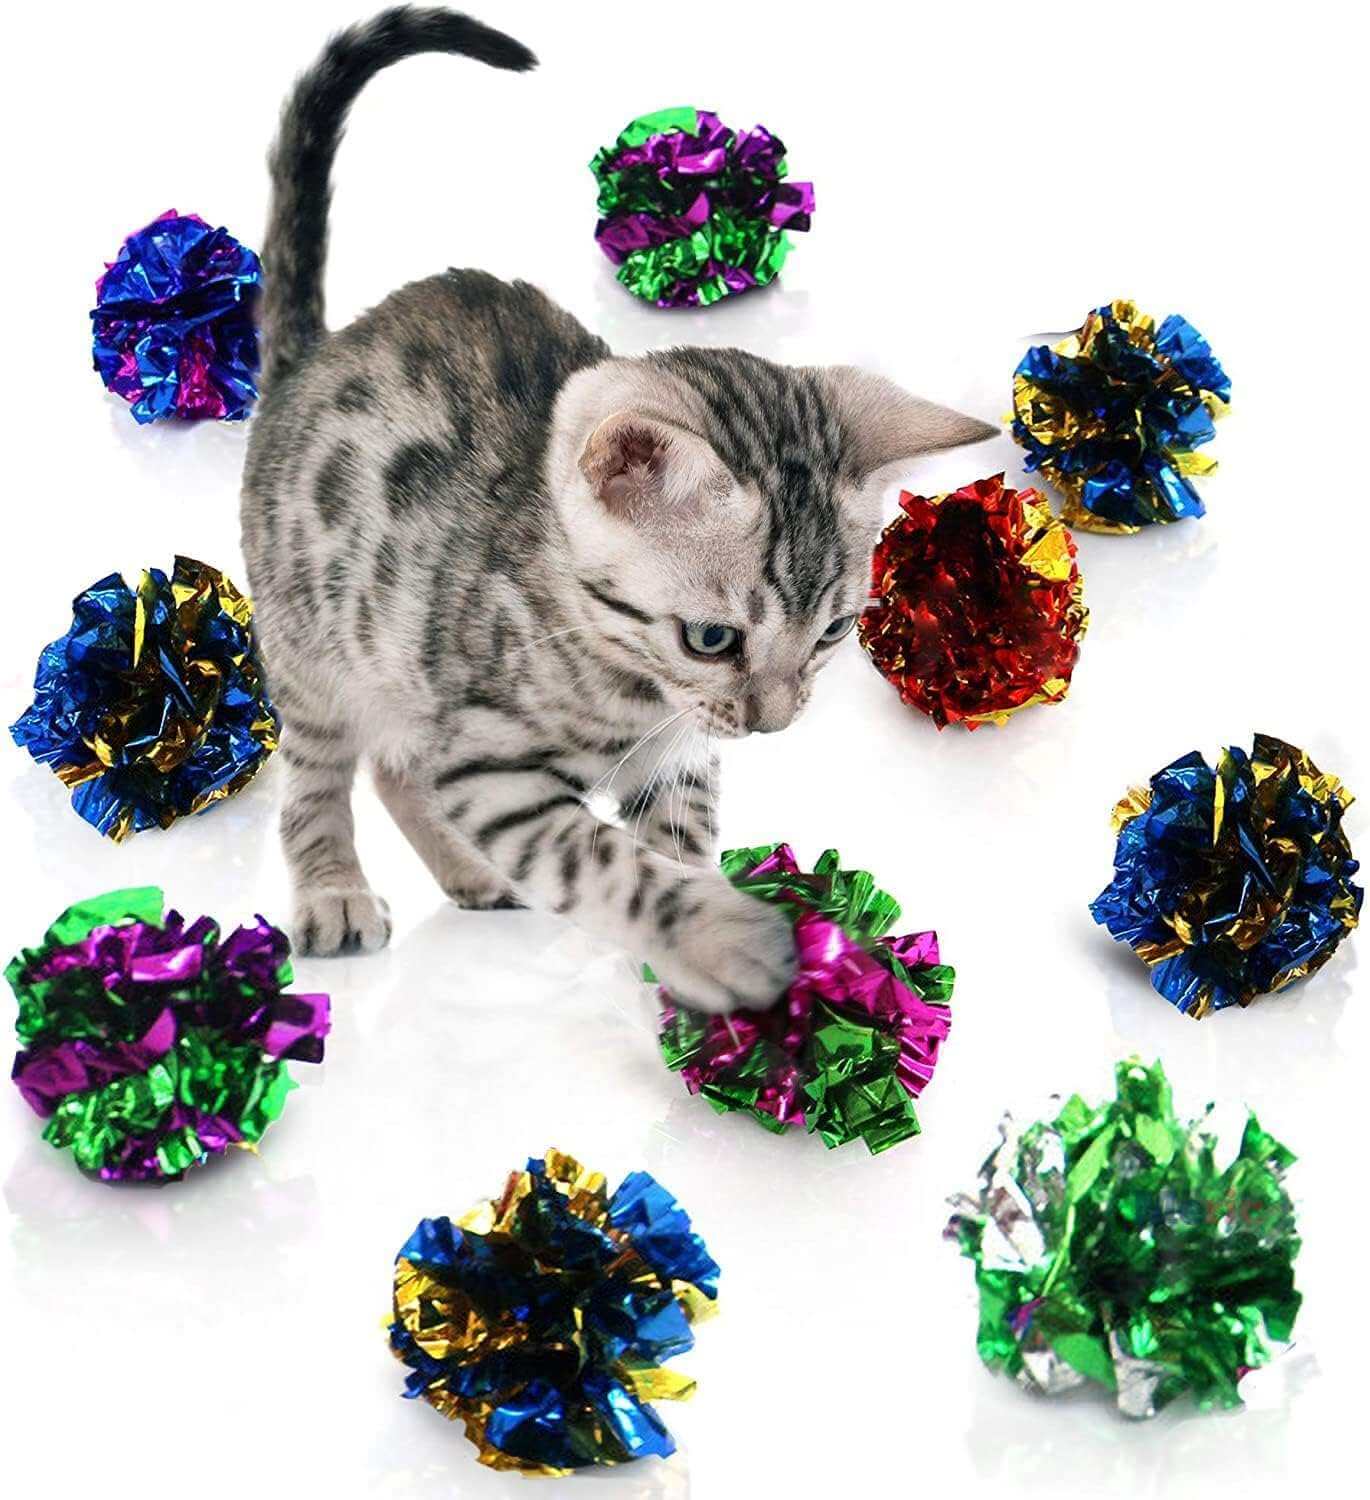 kutkutstyle Toys KUTKUT 12Pcs Crinkle Balls for Cats, Shiny and Stress Buster Crinkler, Suitable for Multiple Cats' Play, Ideal for Kittens and Grown-up Cats